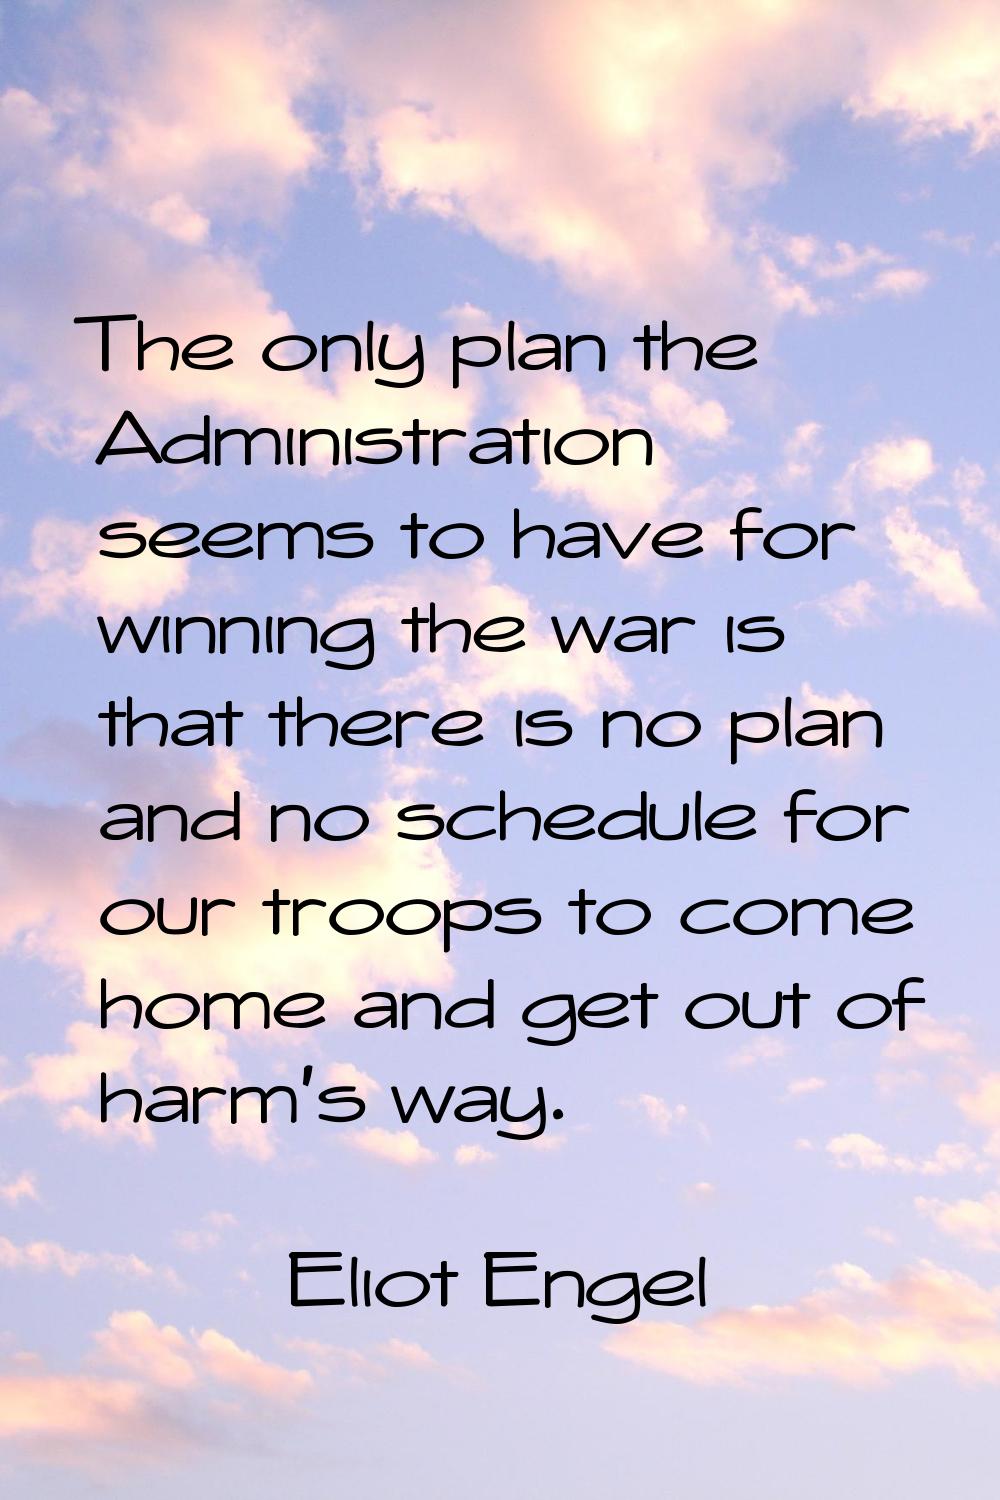 The only plan the Administration seems to have for winning the war is that there is no plan and no 